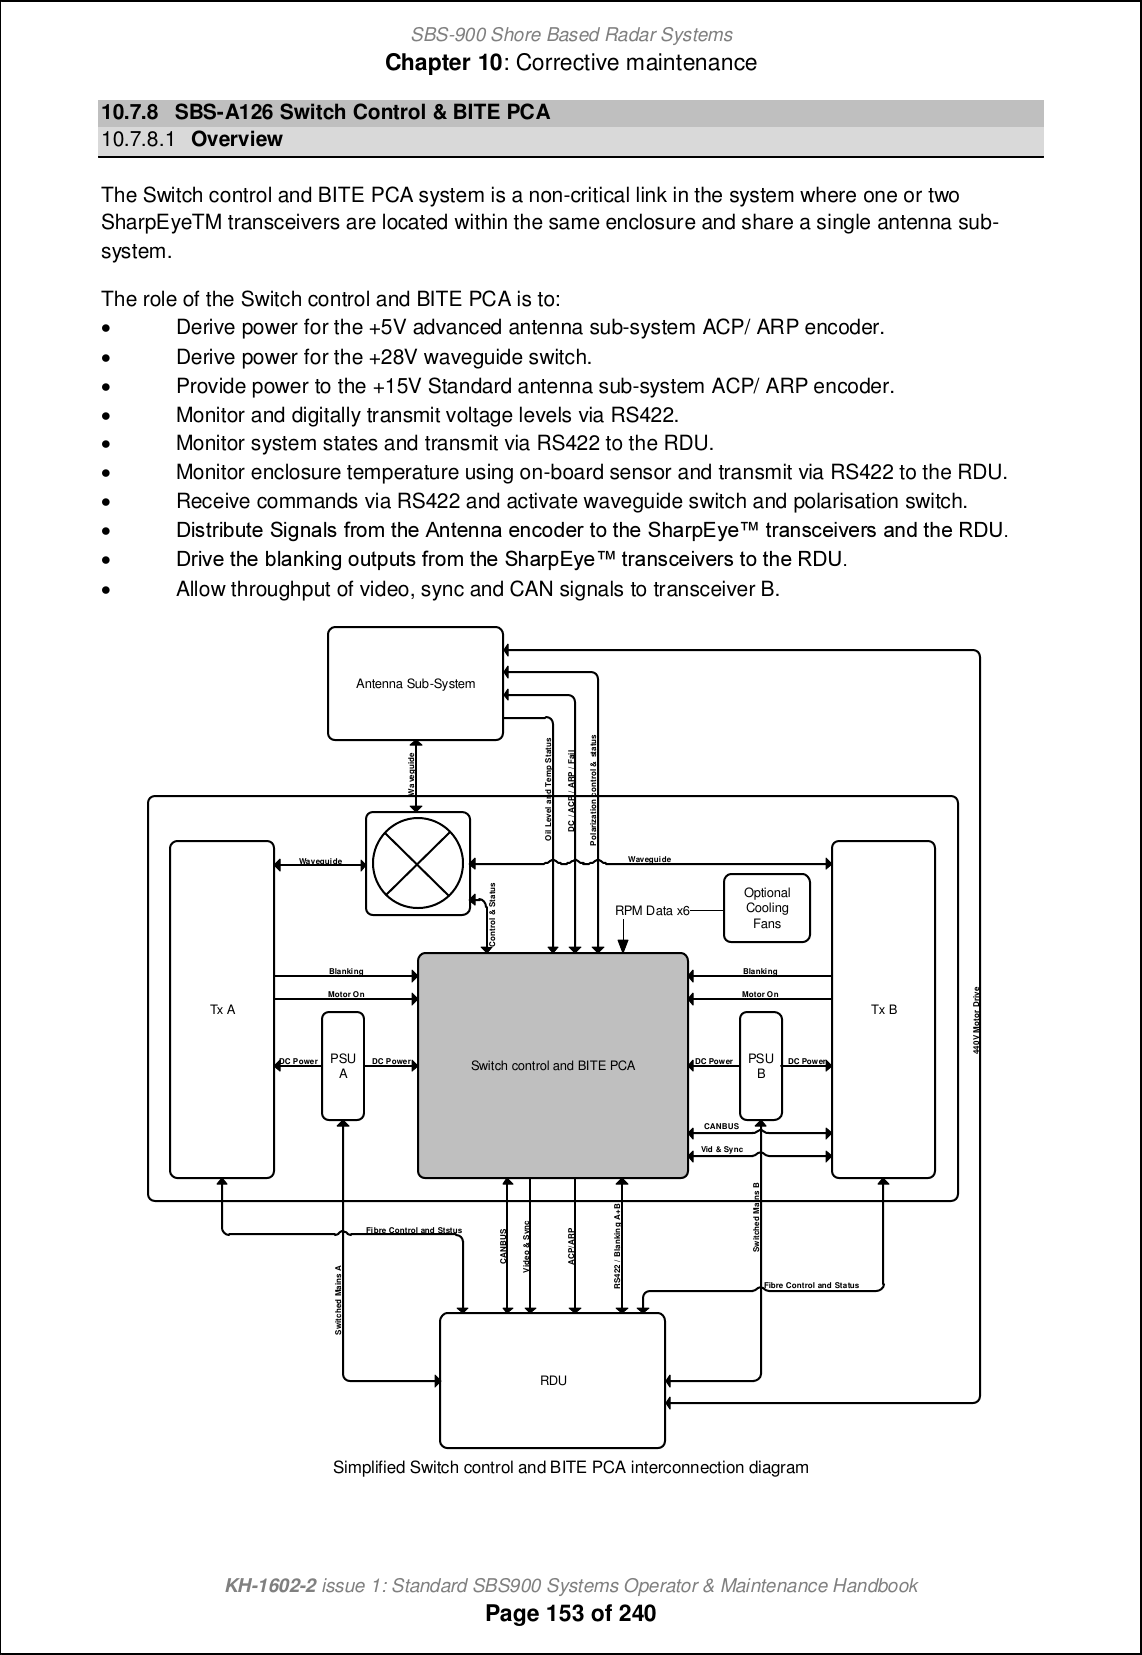 SBS-900 Shore Based Radar SystemsChapter 10: Corrective maintenanceKH-1602-2 issue 1: Standard SBS900 Systems Operator &amp; Maintenance HandbookPage 153 of 24010.7.8 SBS-A126 Switch Control &amp; BITE PCA10.7.8.1 OverviewThe Switch control and BITE PCA system is a non-critical link in the system where one or twoSharpEyeTM transceivers are located within the same enclosure and share a single antenna sub-system.The role of the Switch control and BITE PCA is to:&apos;Derive power for the +5V advanced antenna sub-system ACP/ ARP encoder.&apos;Derive power for the +28V waveguide switch.&apos;Provide power to the +15V Standard antenna sub-system ACP/ ARP encoder.&apos;Monitor and digitally transmit voltage levels via RS422.&apos;Monitor system states and transmit via RS422 to the RDU.&apos;Monitor enclosure temperature using on-board sensor and transmit via RS422 to the RDU.&apos;Receive commands via RS422 and activate waveguide switch and polarisation switch.&apos;Ccmnlc\on_ Rcah[fm `lig nb_ @hn_hh[ _h]i^_l ni nb_ Rb[ljDs_x nl[hm]_cp_lm [h^ nb_ QCT-&apos;Clcp_ nb_ \f[hecha ionjonm `lig nb_ Rb[ljDs_x nl[hm]_cp_lm ni nb_ QCT-&apos;Allow throughput of video, sync and CAN signals to transceiver B.Tx A Tx BPSUAPSUBSwitch control and BITE PCARDUAntenna Sub-SystemSwitched Mains BFibre Control and StstusControl &amp; StatusMotor OnBlanking BlankingMotor OnSwitched Mains ARS422 / Blanking A+BOil Level and Temp StatusDC / ACP / ARP / FailPolarization control &amp; statusDC Power440V Motor DriveDC PowerDC Power DC PowerWaveguideWaveguideWaveguideFibre Control and StatusACP/ARPCANBUSCANBUSVideo &amp; SyncVid &amp; SyncOptionalCoolingFansRPM Data x6Simplified Switch control and BITE PCA interconnection diagram